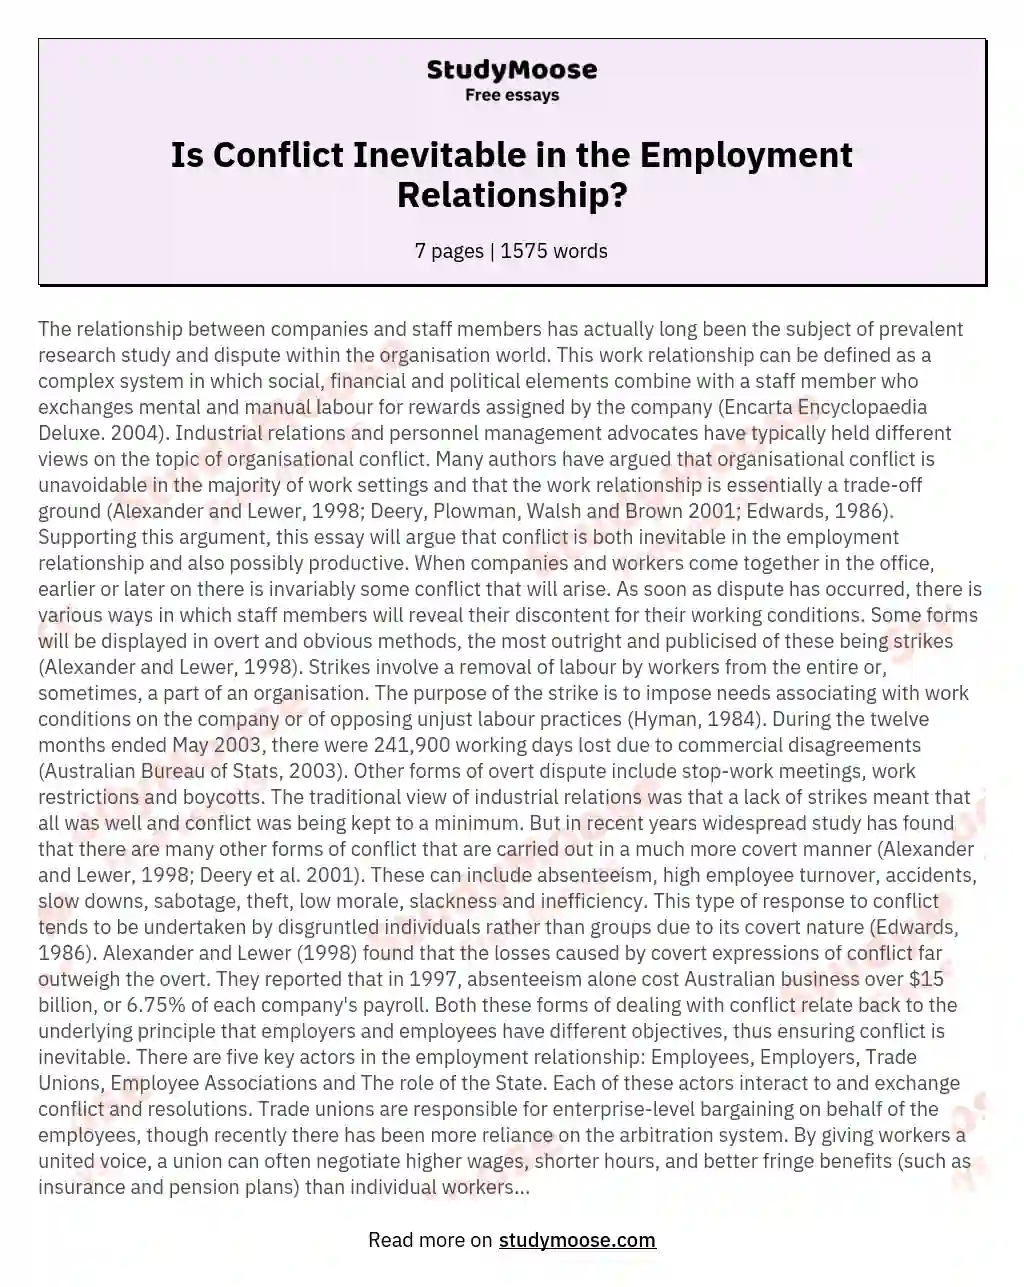 Is Conflict Inevitable in the Employment Relationship? essay